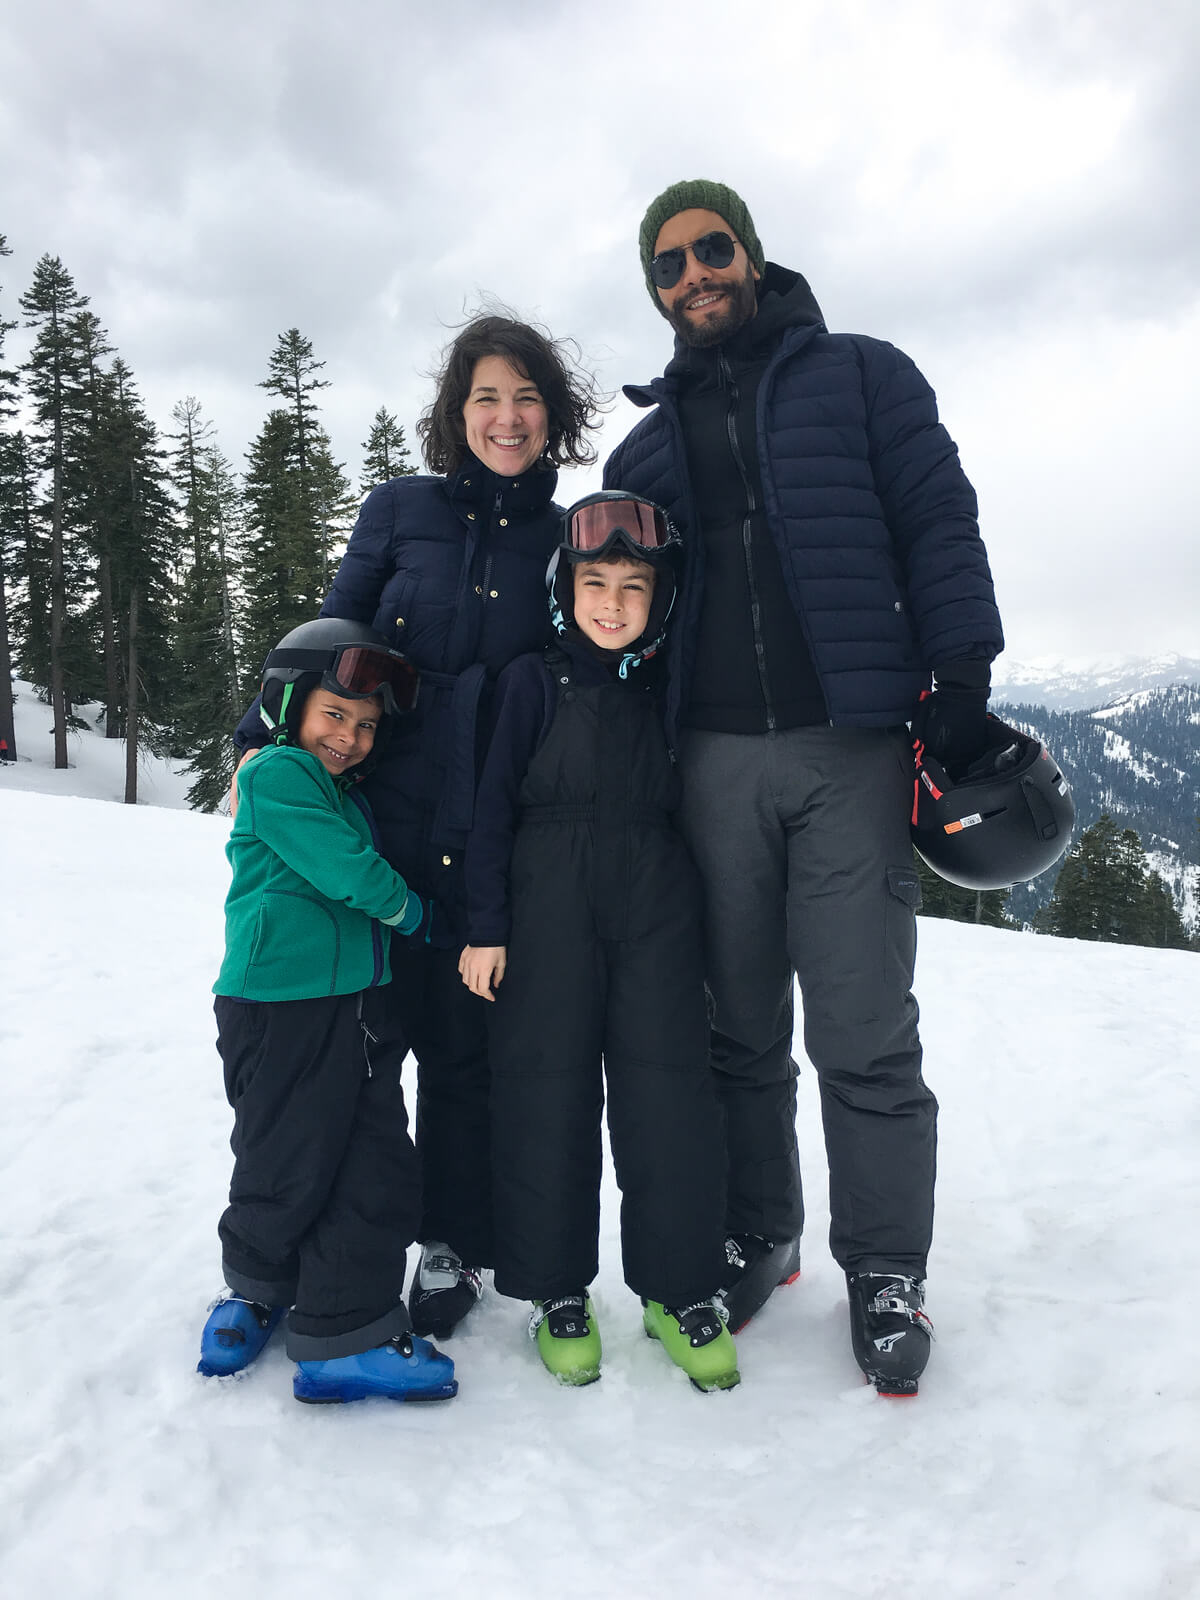 What's it like to learn to ski with kids?